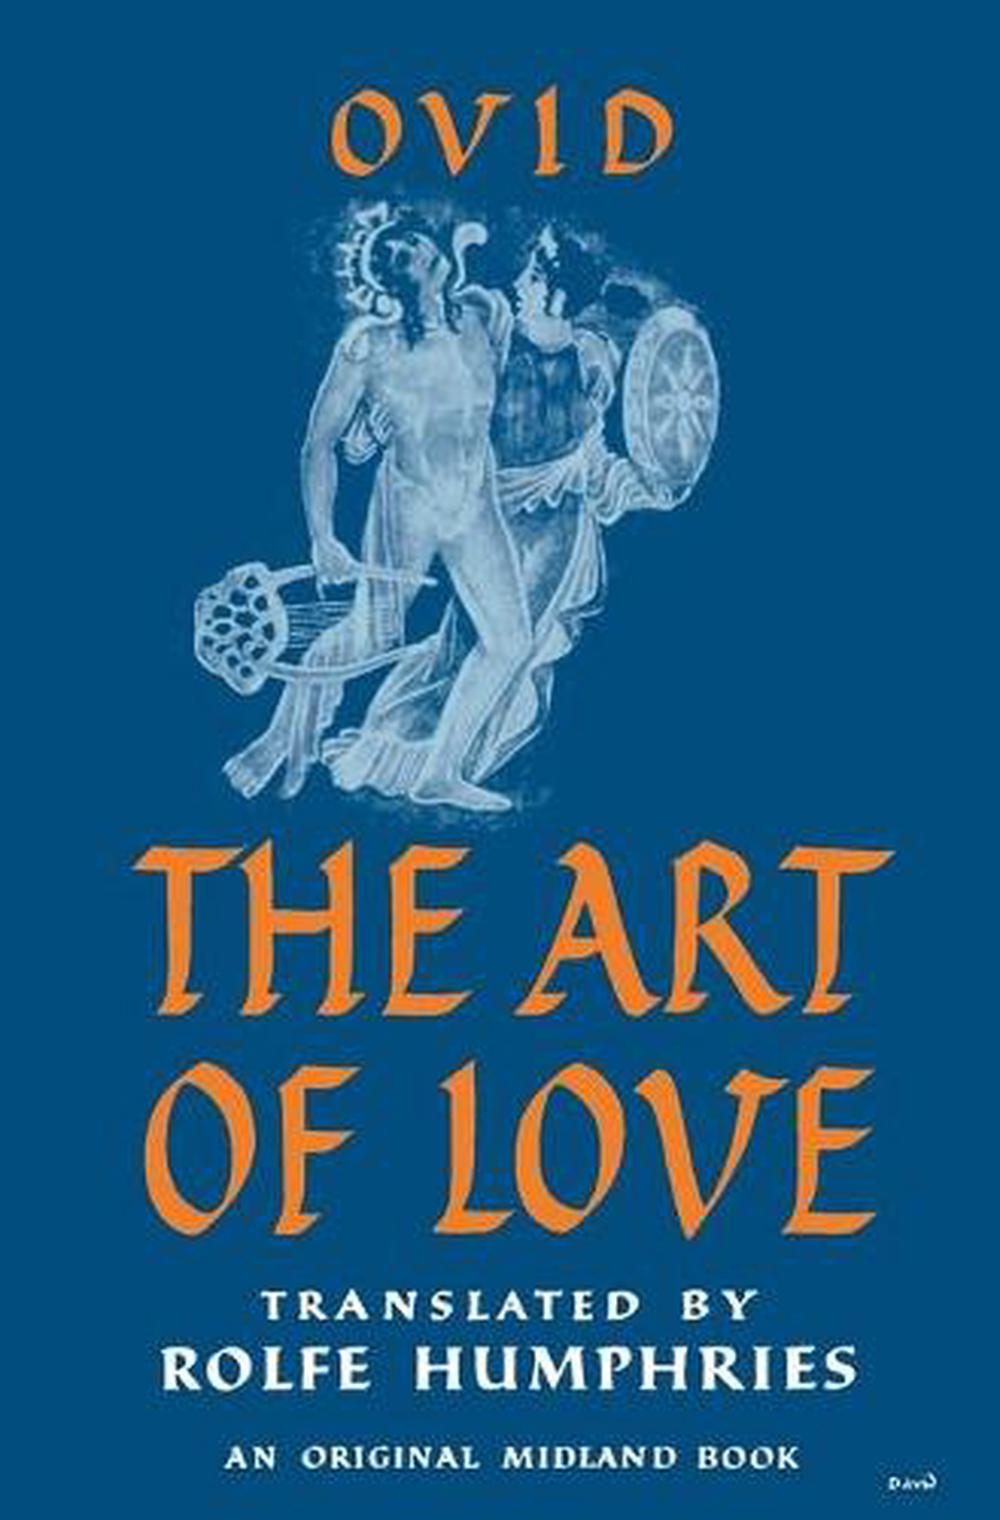 The Art of Love by Ovid (English) Paperback Book Free Shipping